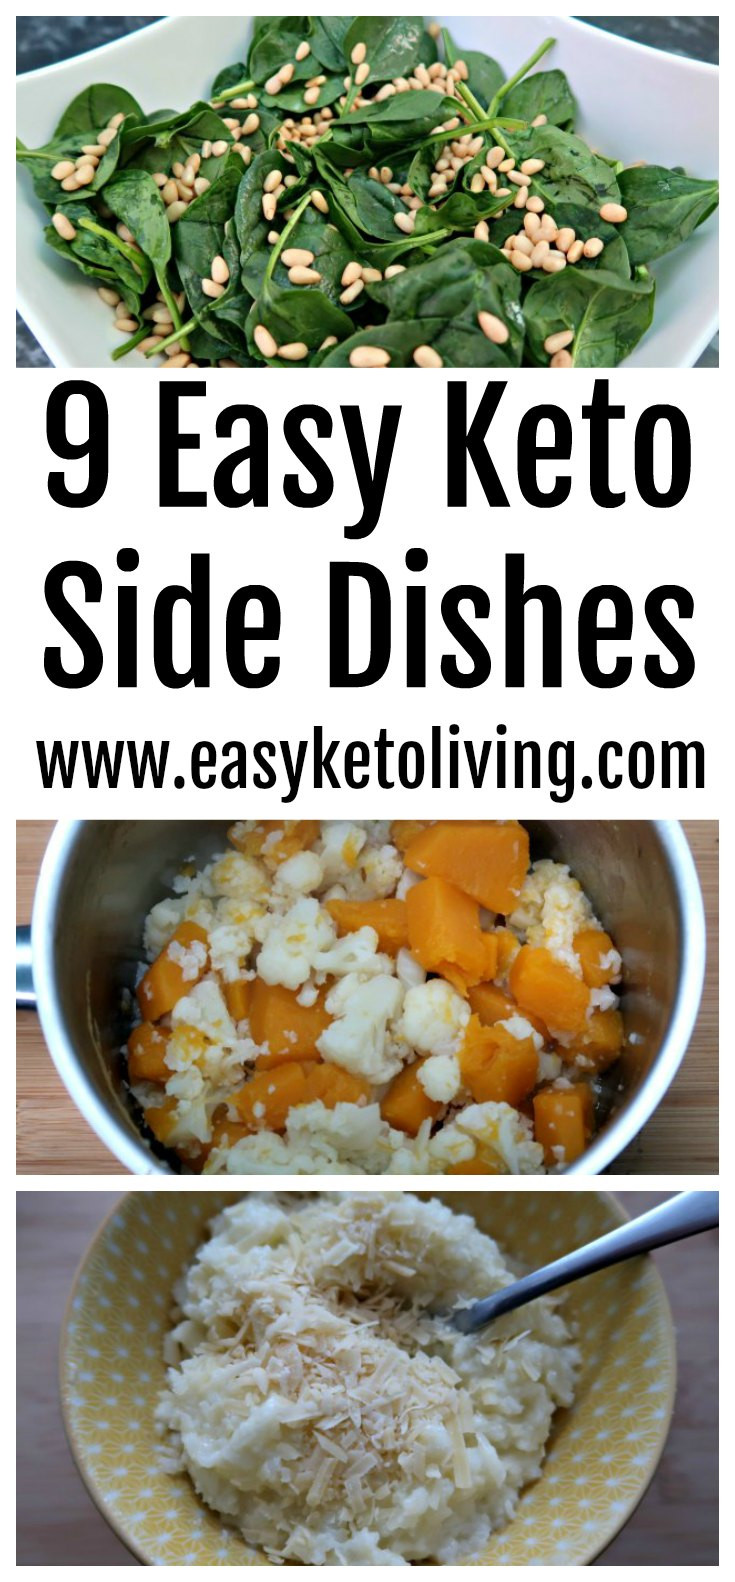 Easy Keto Side Dishes
 9 Easy Keto Sides Recipes Low Carb Side Dishes